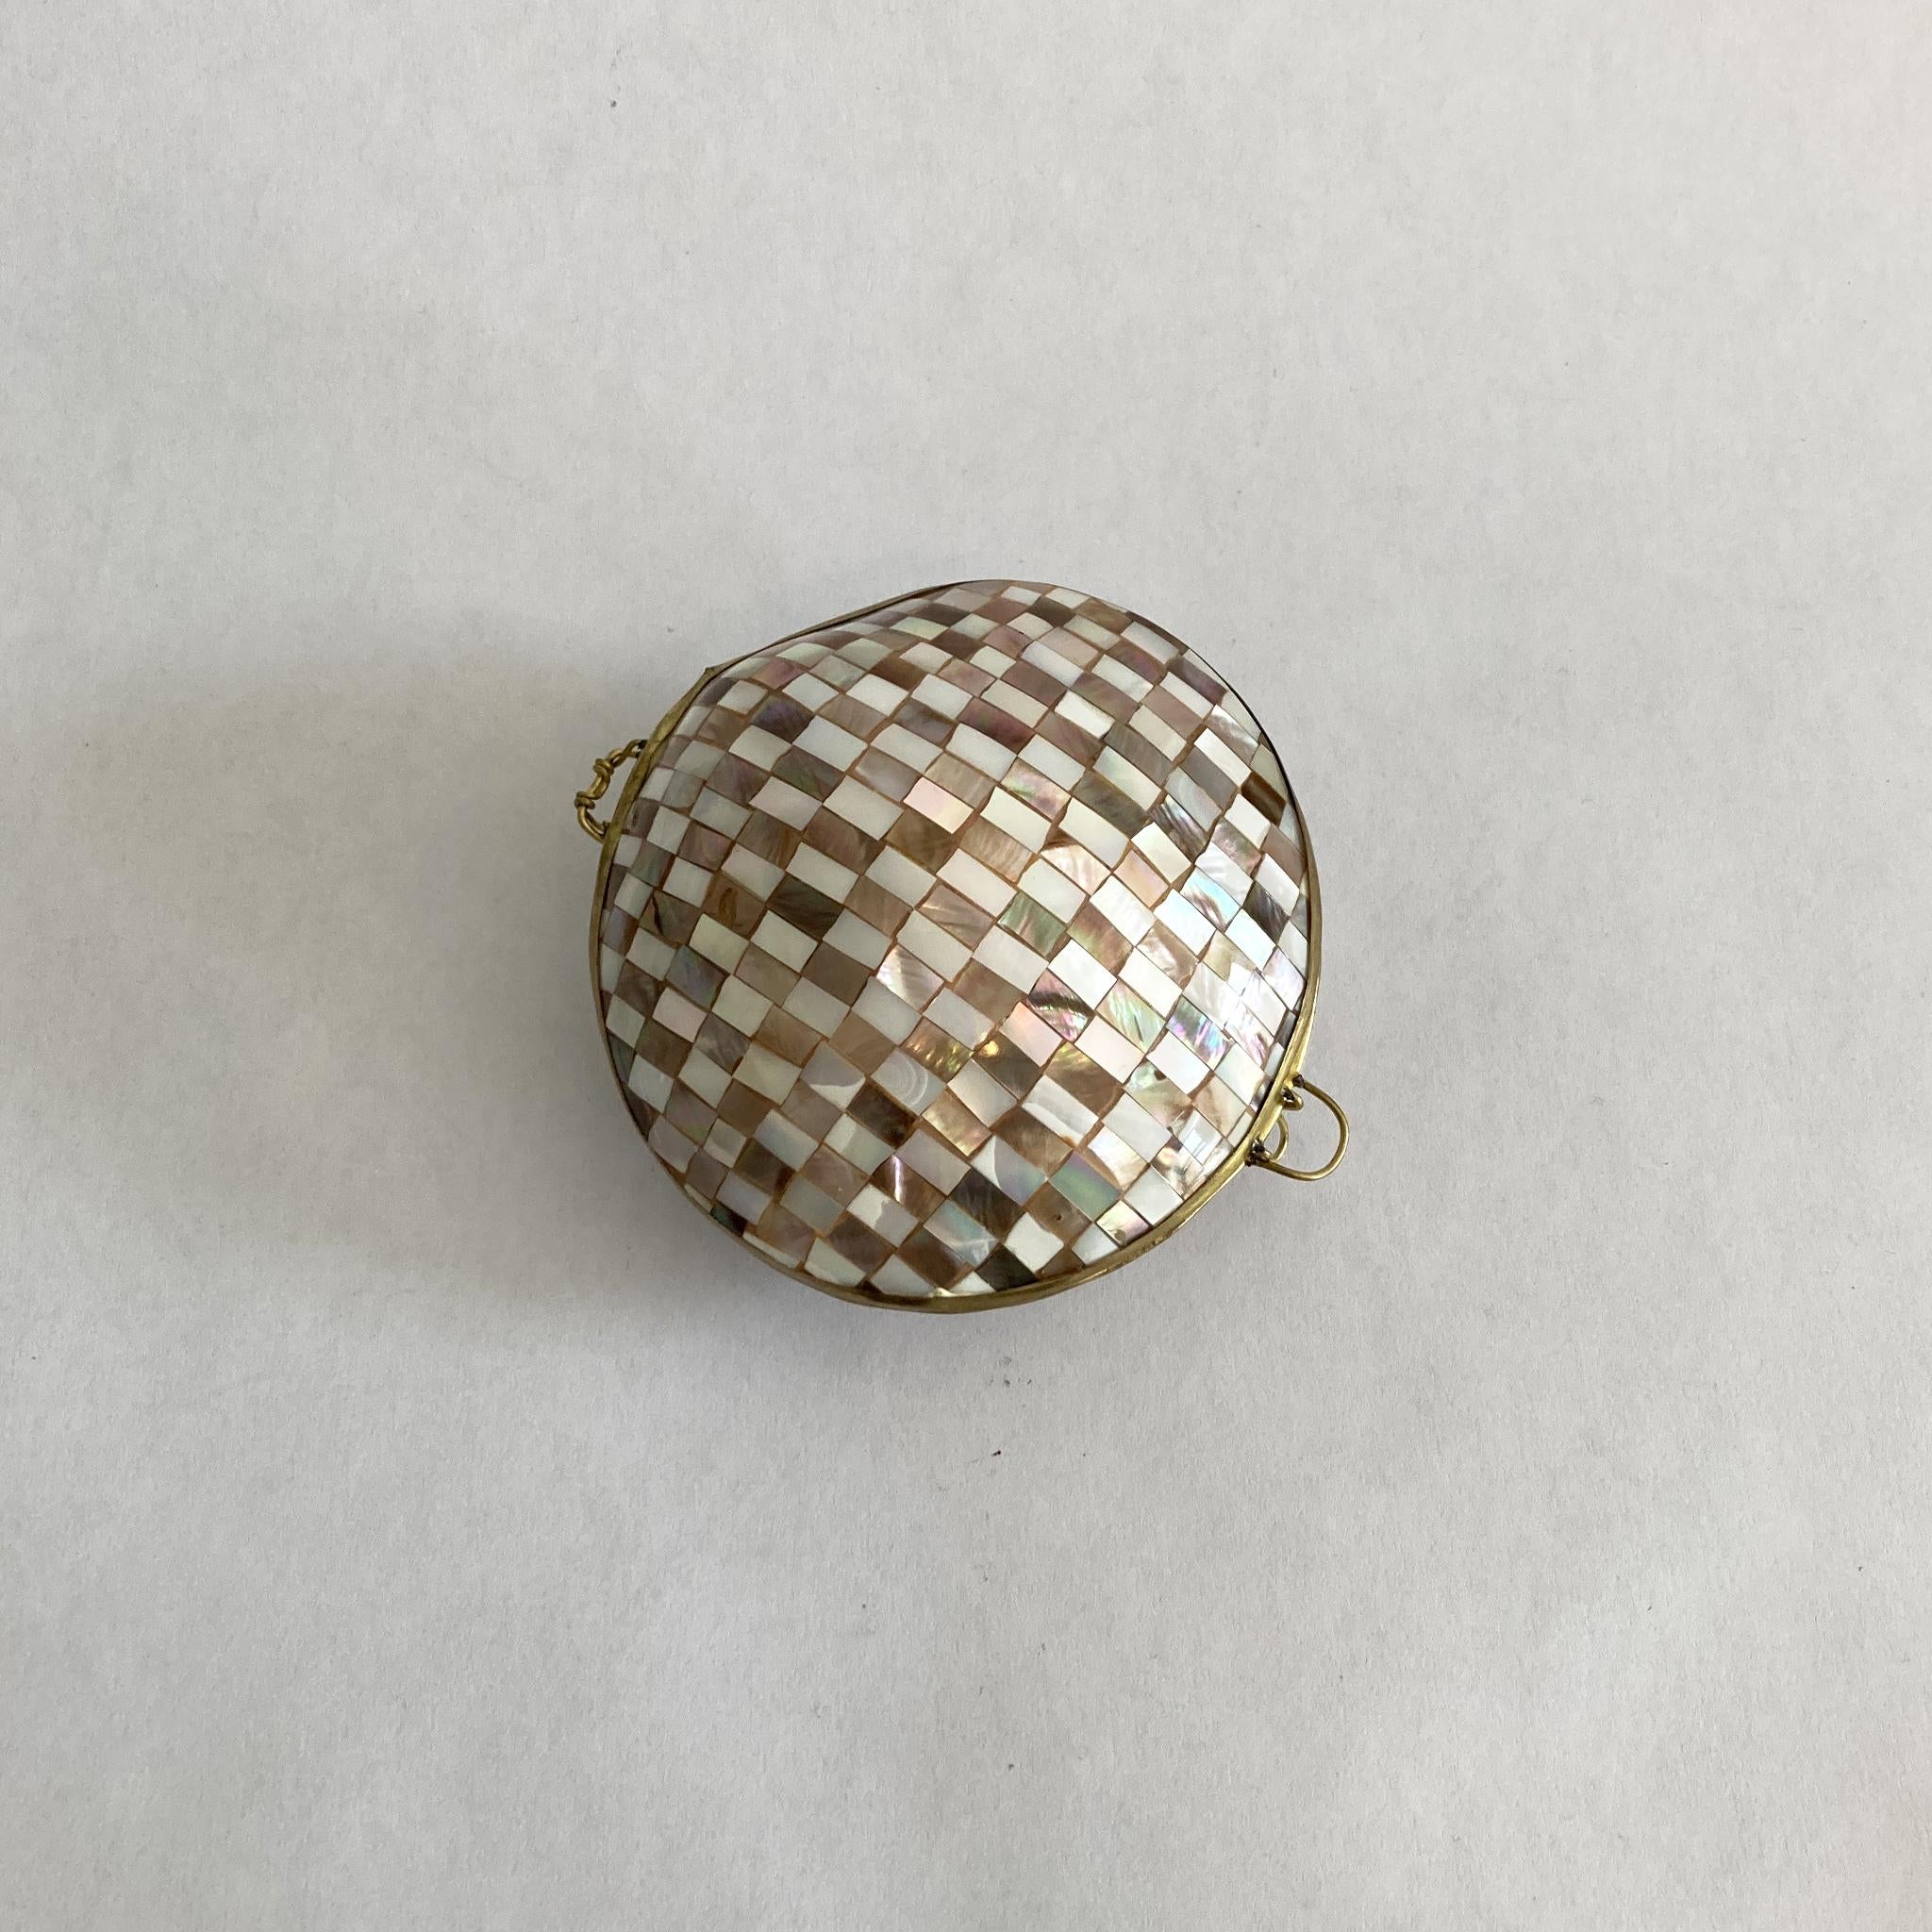 Unknown Vintage Hinged Seashell Box, in Checkerboard Mother of Pearl Mosaic, Brass Trim